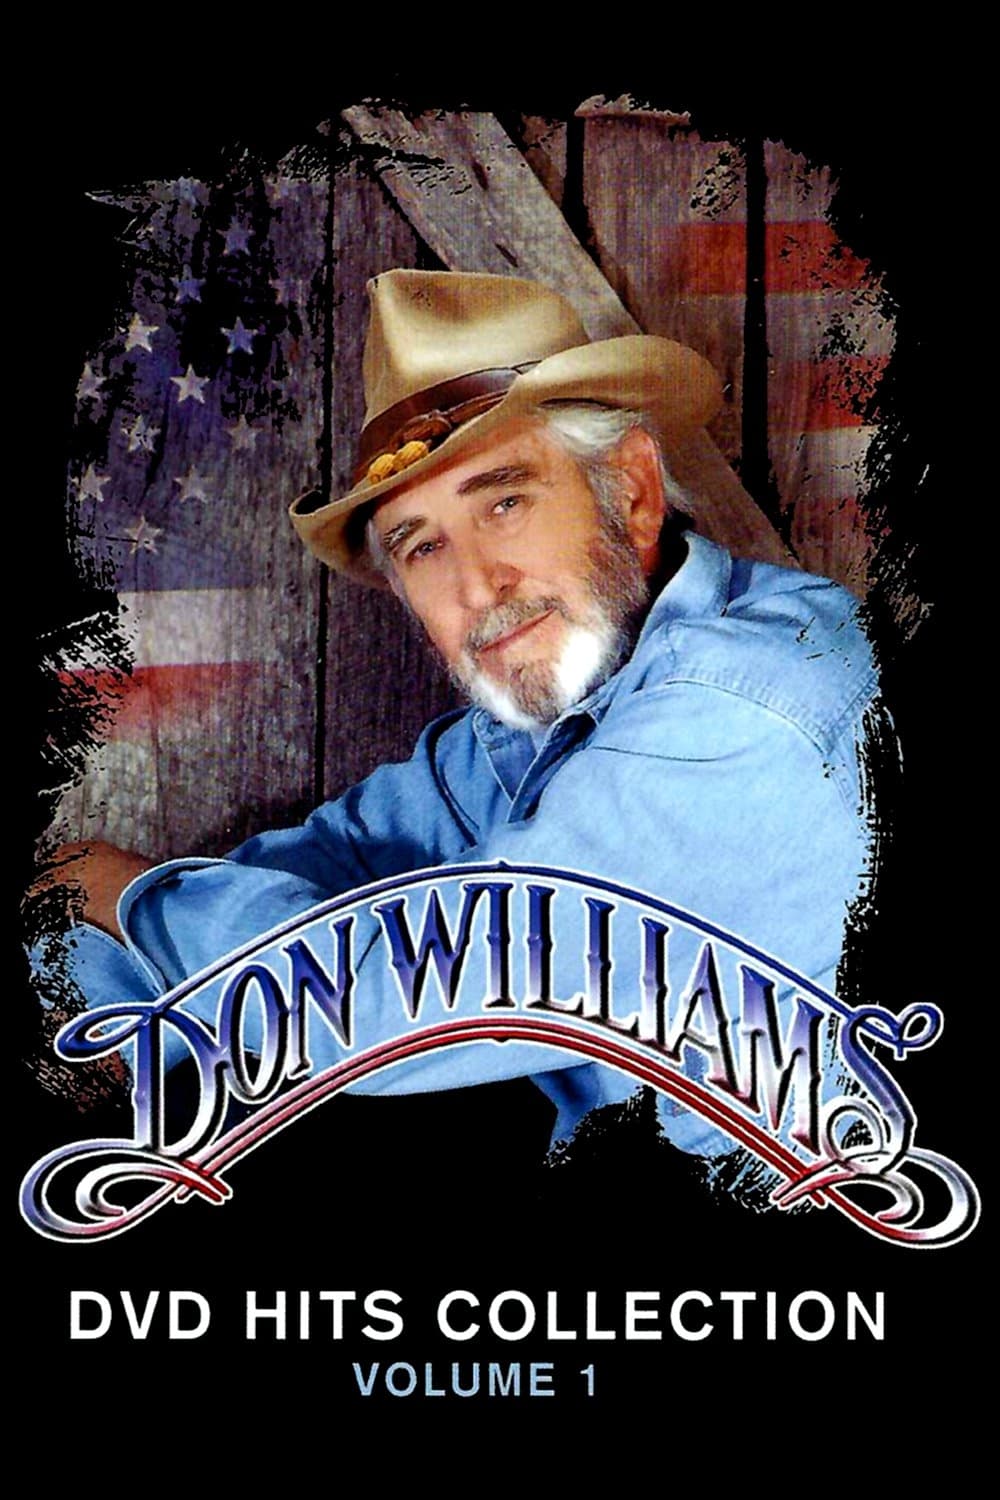 Don Williams DVD Hits Collection Volume 1